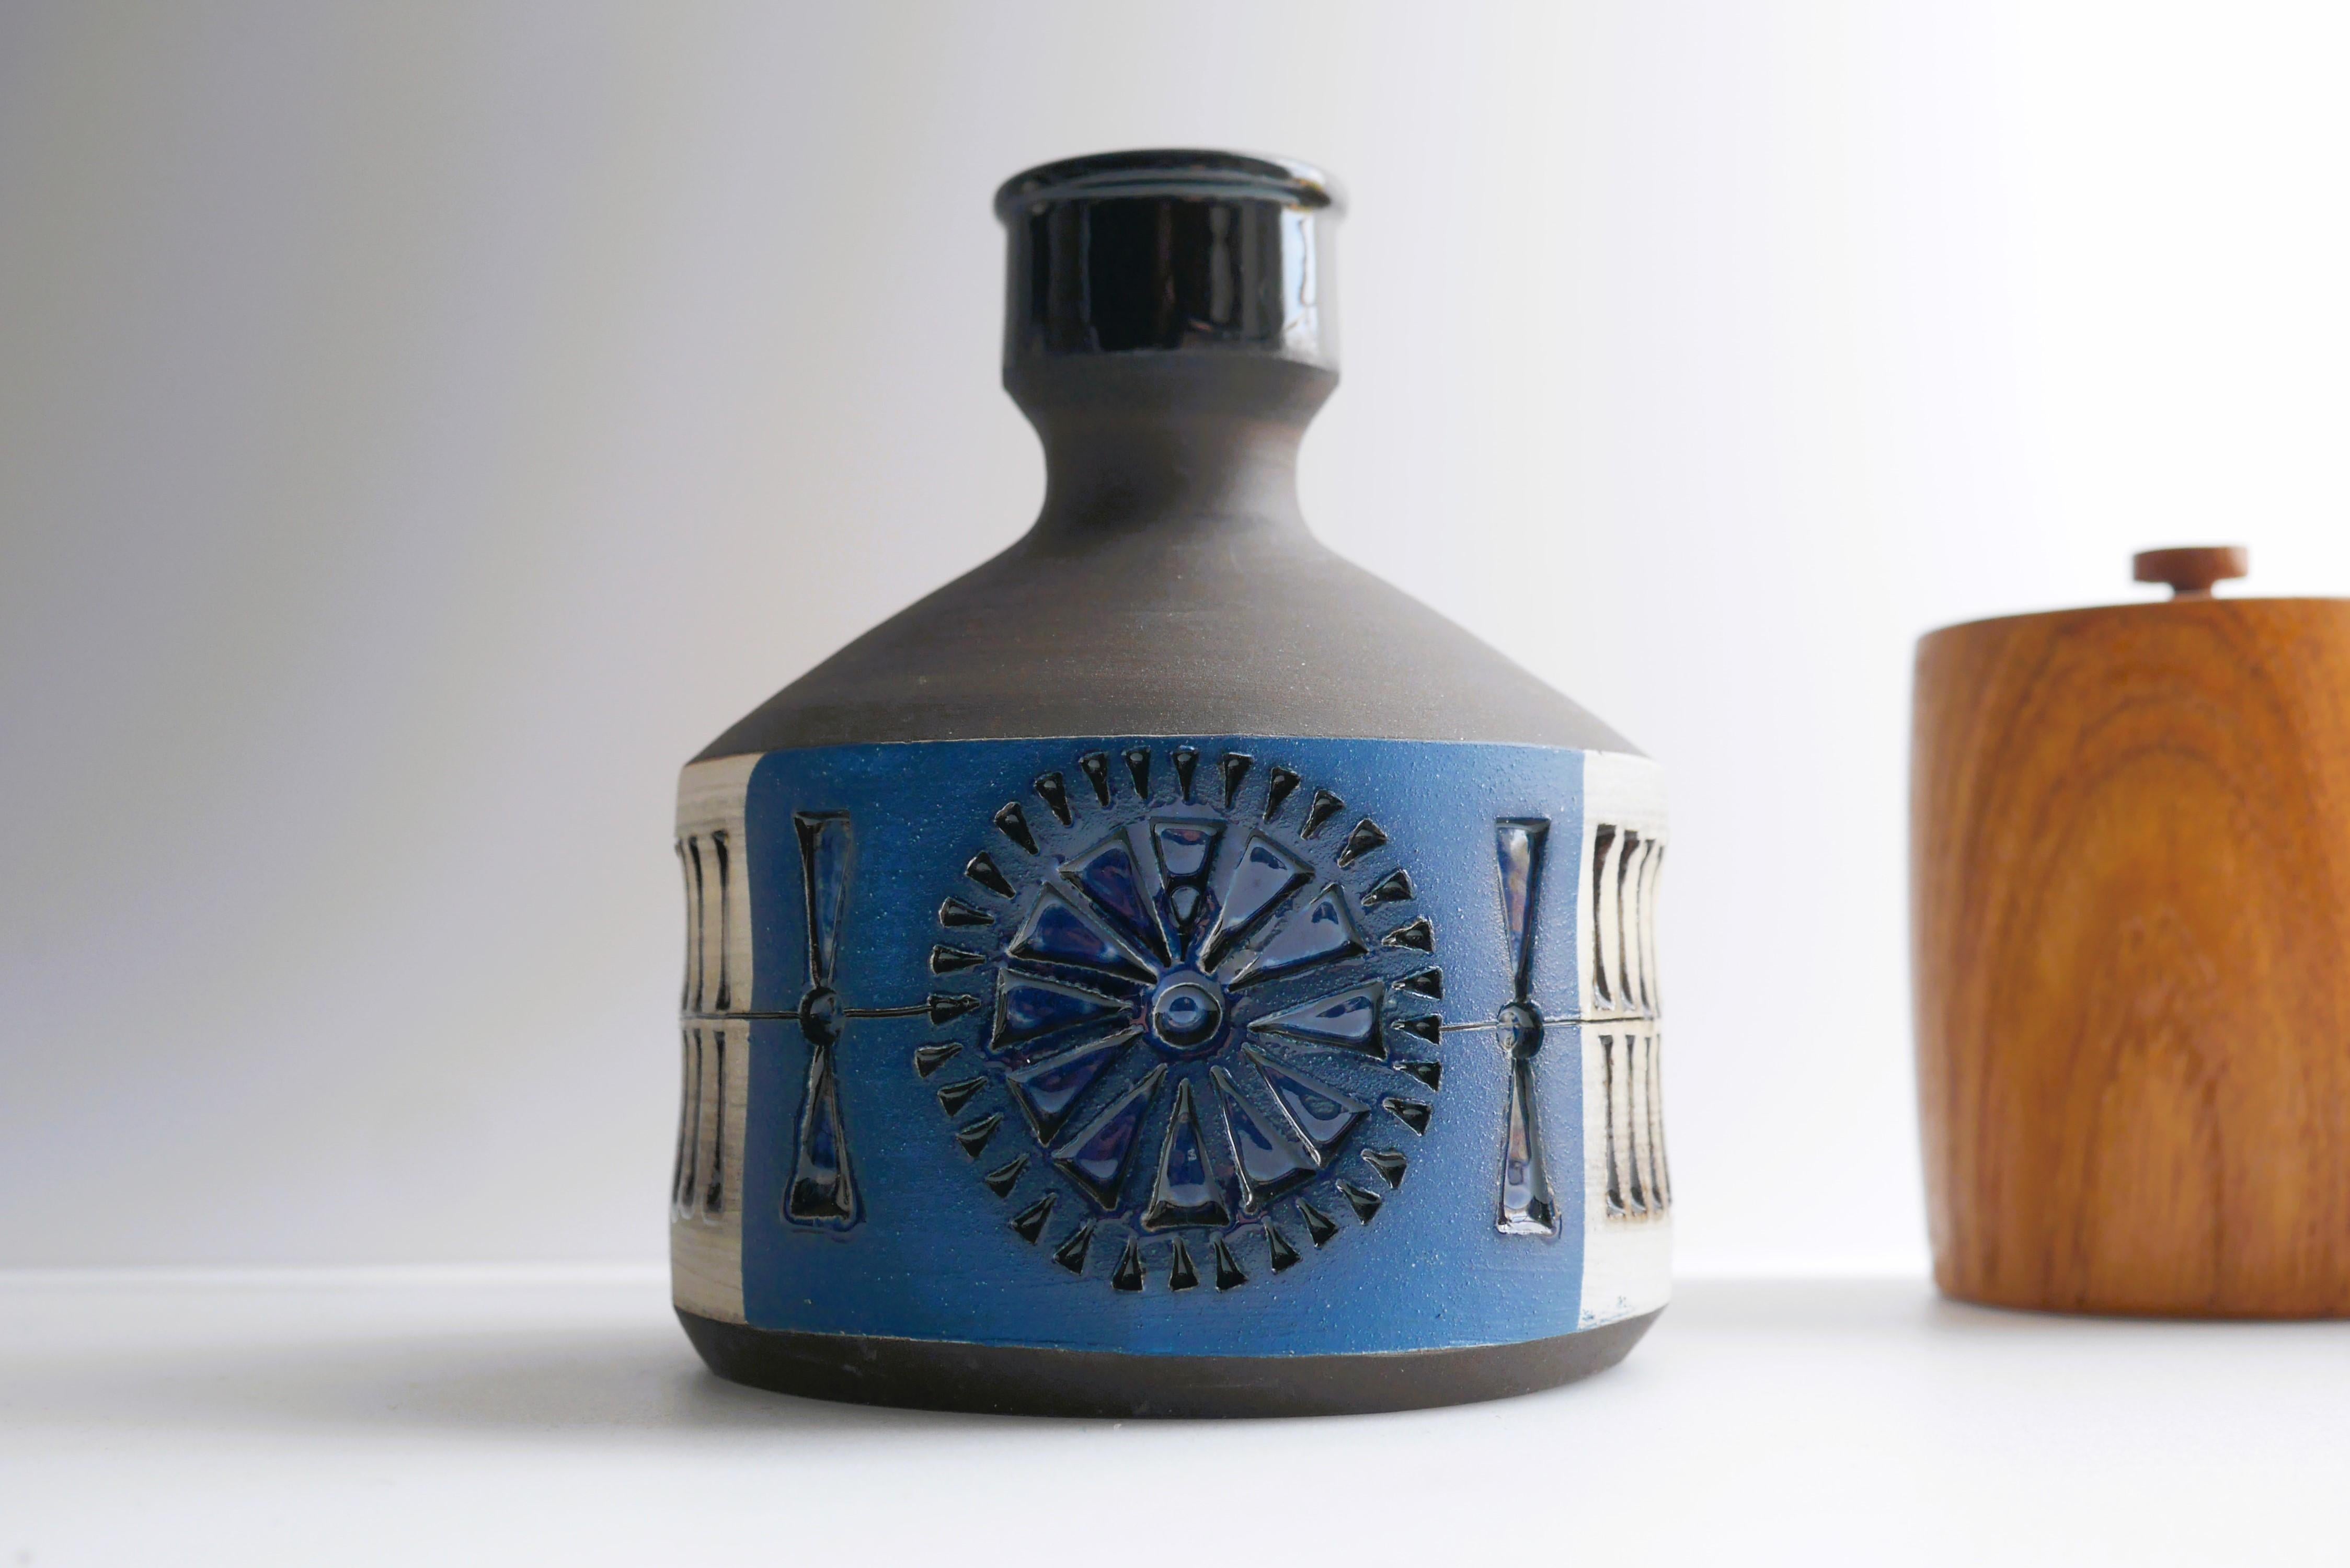 A beautiful and very special, piece by Tomas Anagrius for Alingsås ceramics, Sweden. A warm, rich brown base and on the sides, there is one bloc of a nice blue colour combined with a block of off-white, both has a simple but intricate pattern